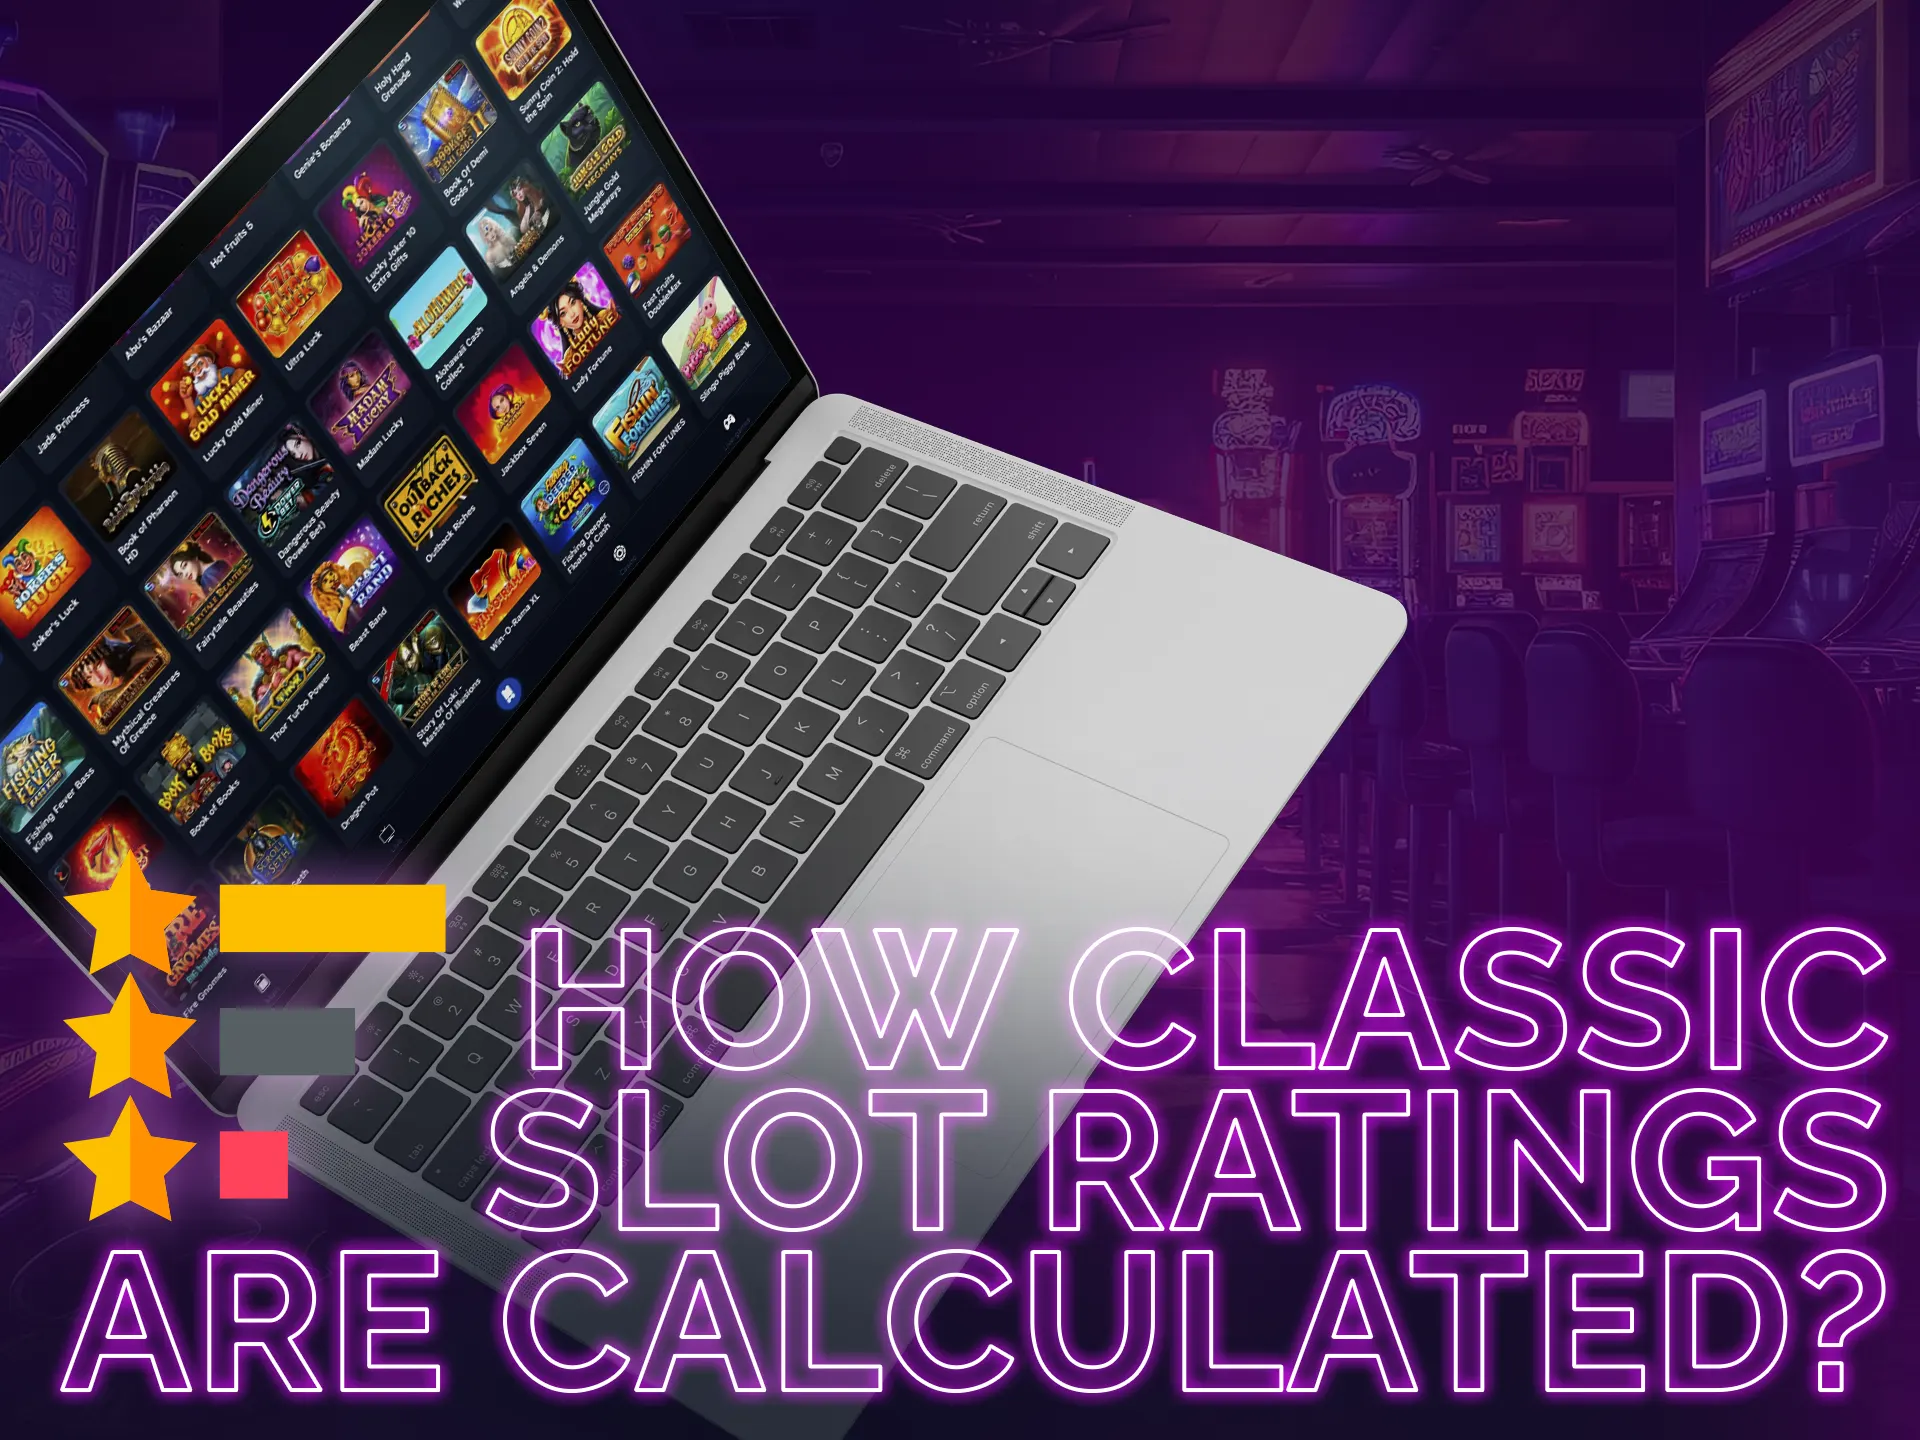 The formation of tops and selections of classic slots is very active.